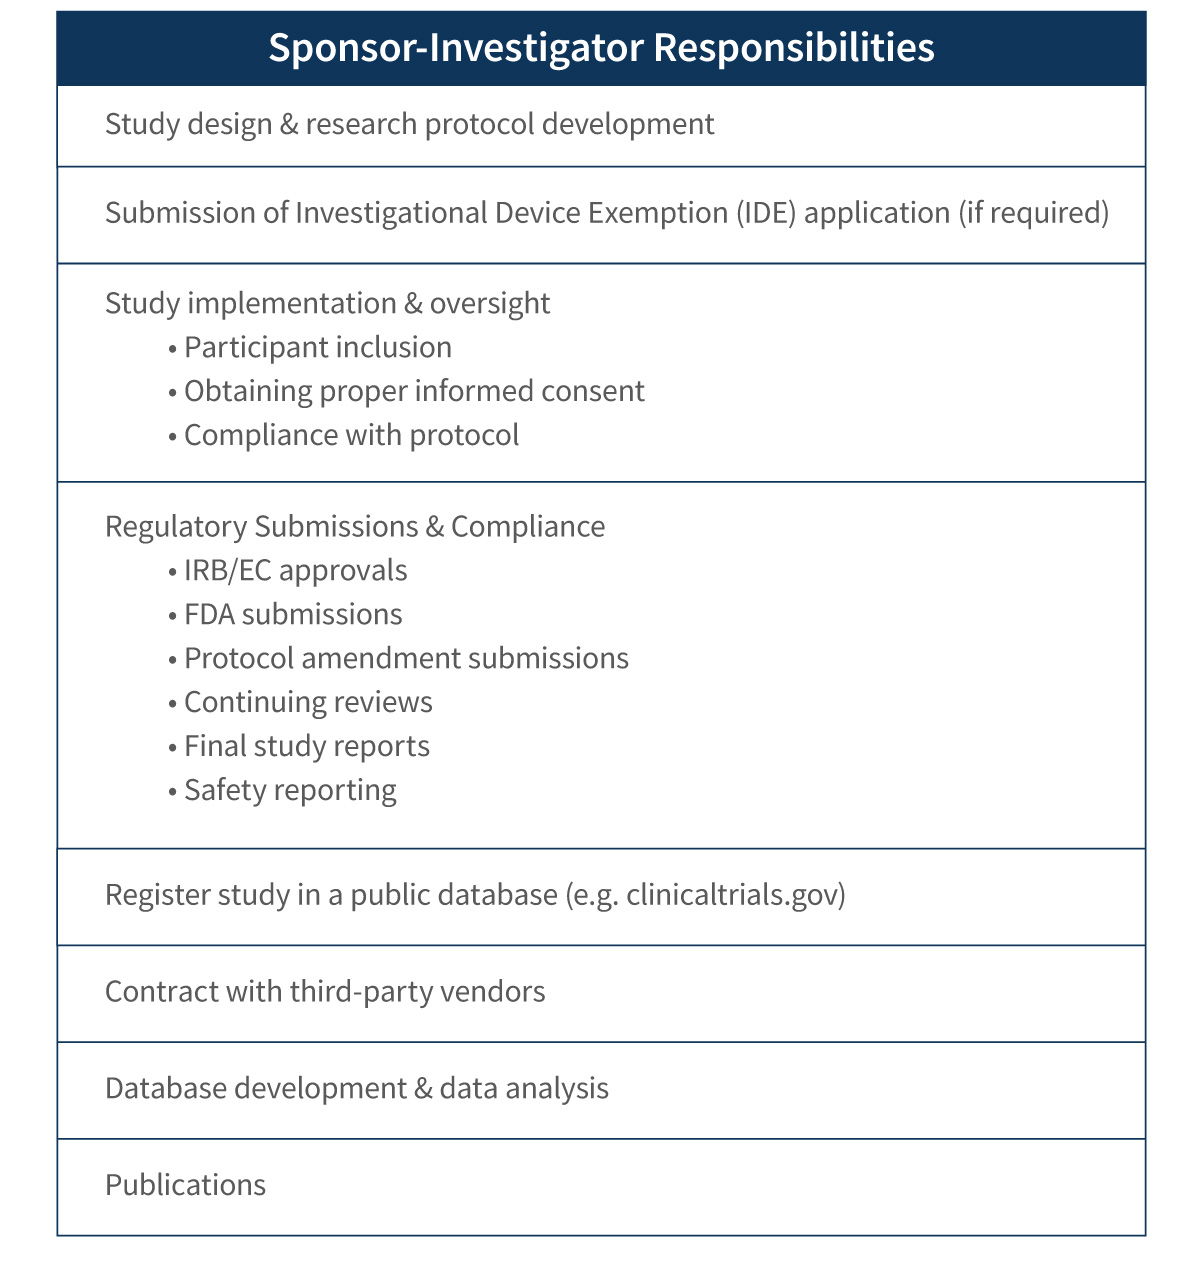 Chart showing the investigator responsibilities